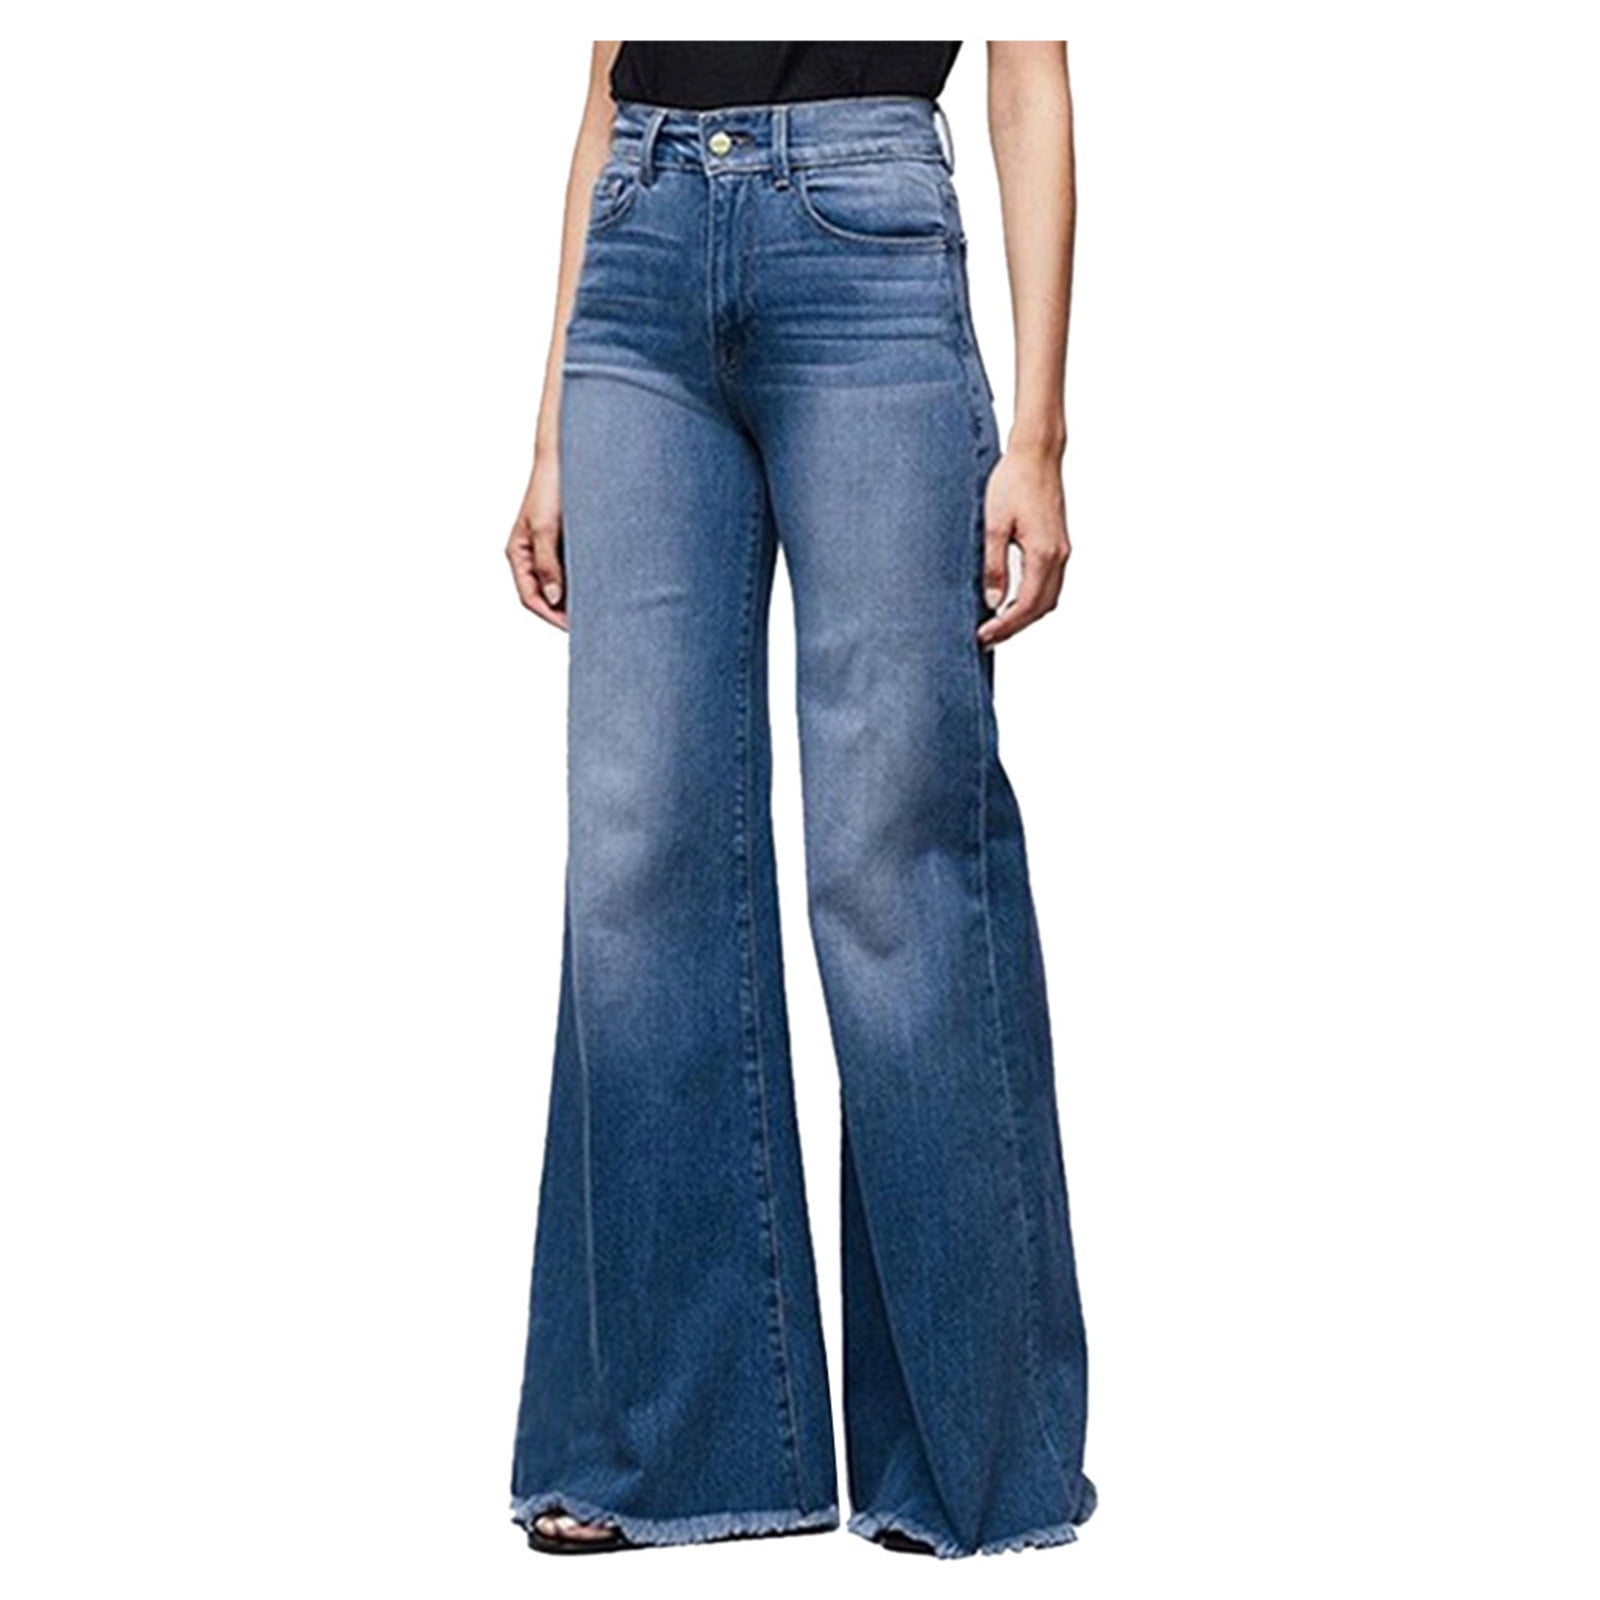 Bigersell Women's High Tapered Jean Full Length Pants Jeans Women's ...